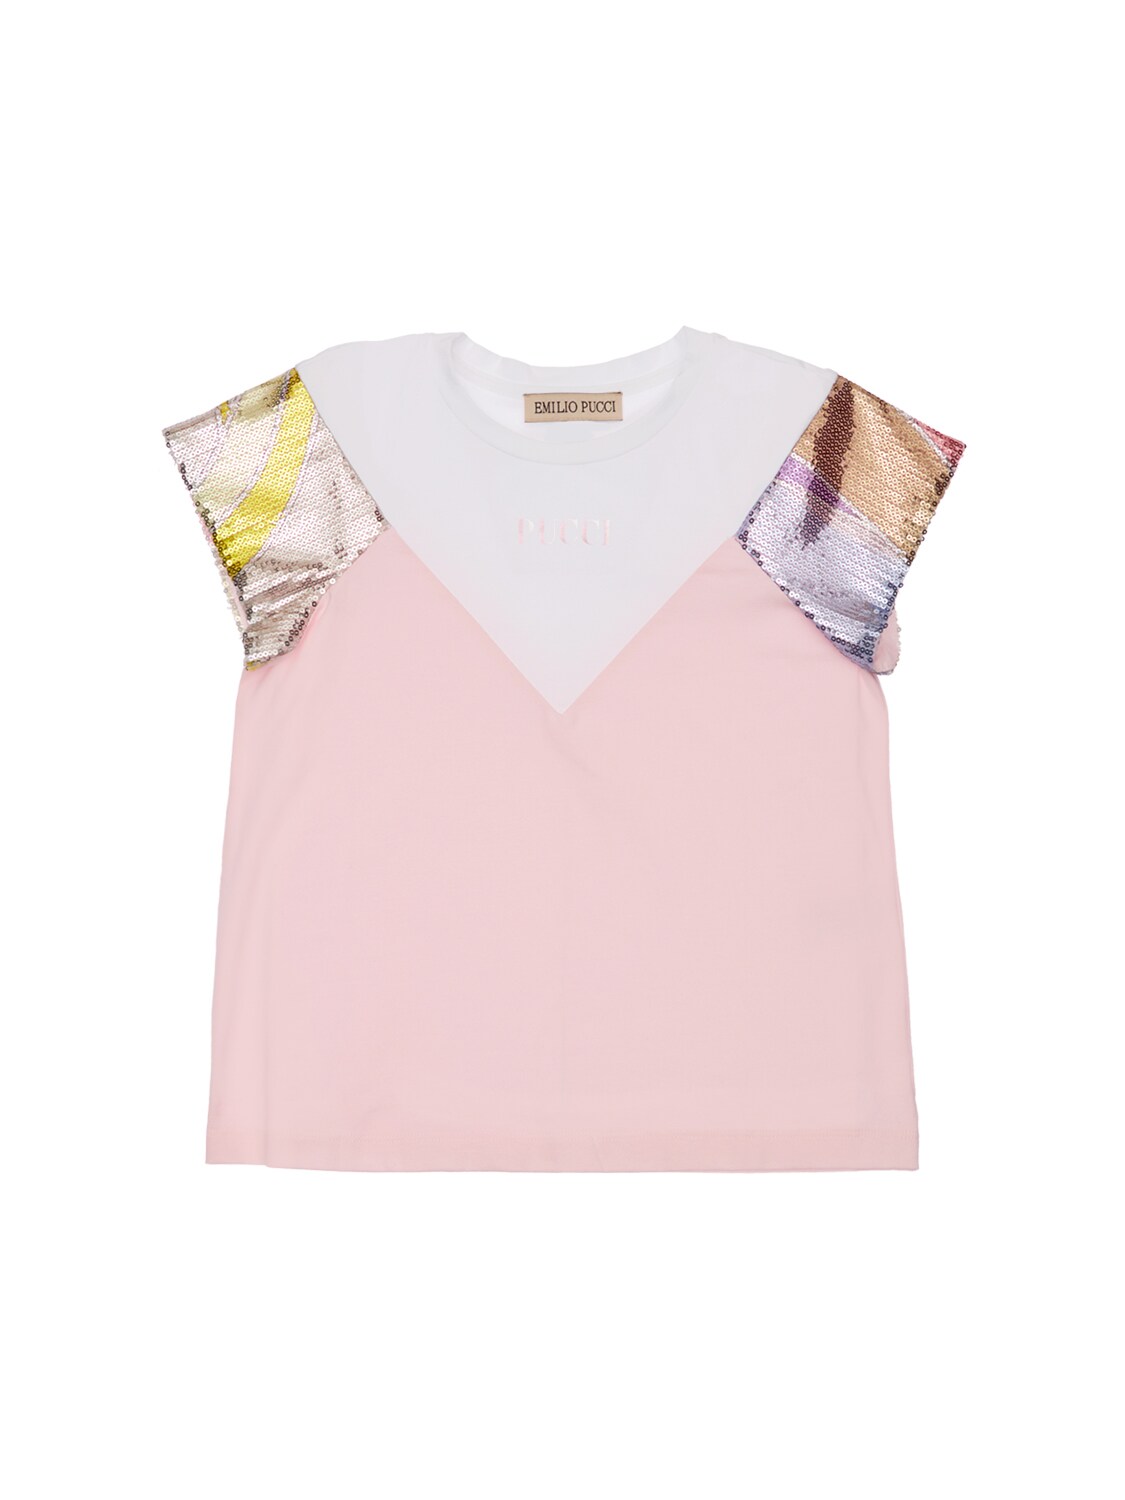 Emilio Pucci Kids' Printed Cotton Jersey T-shirt In Pink